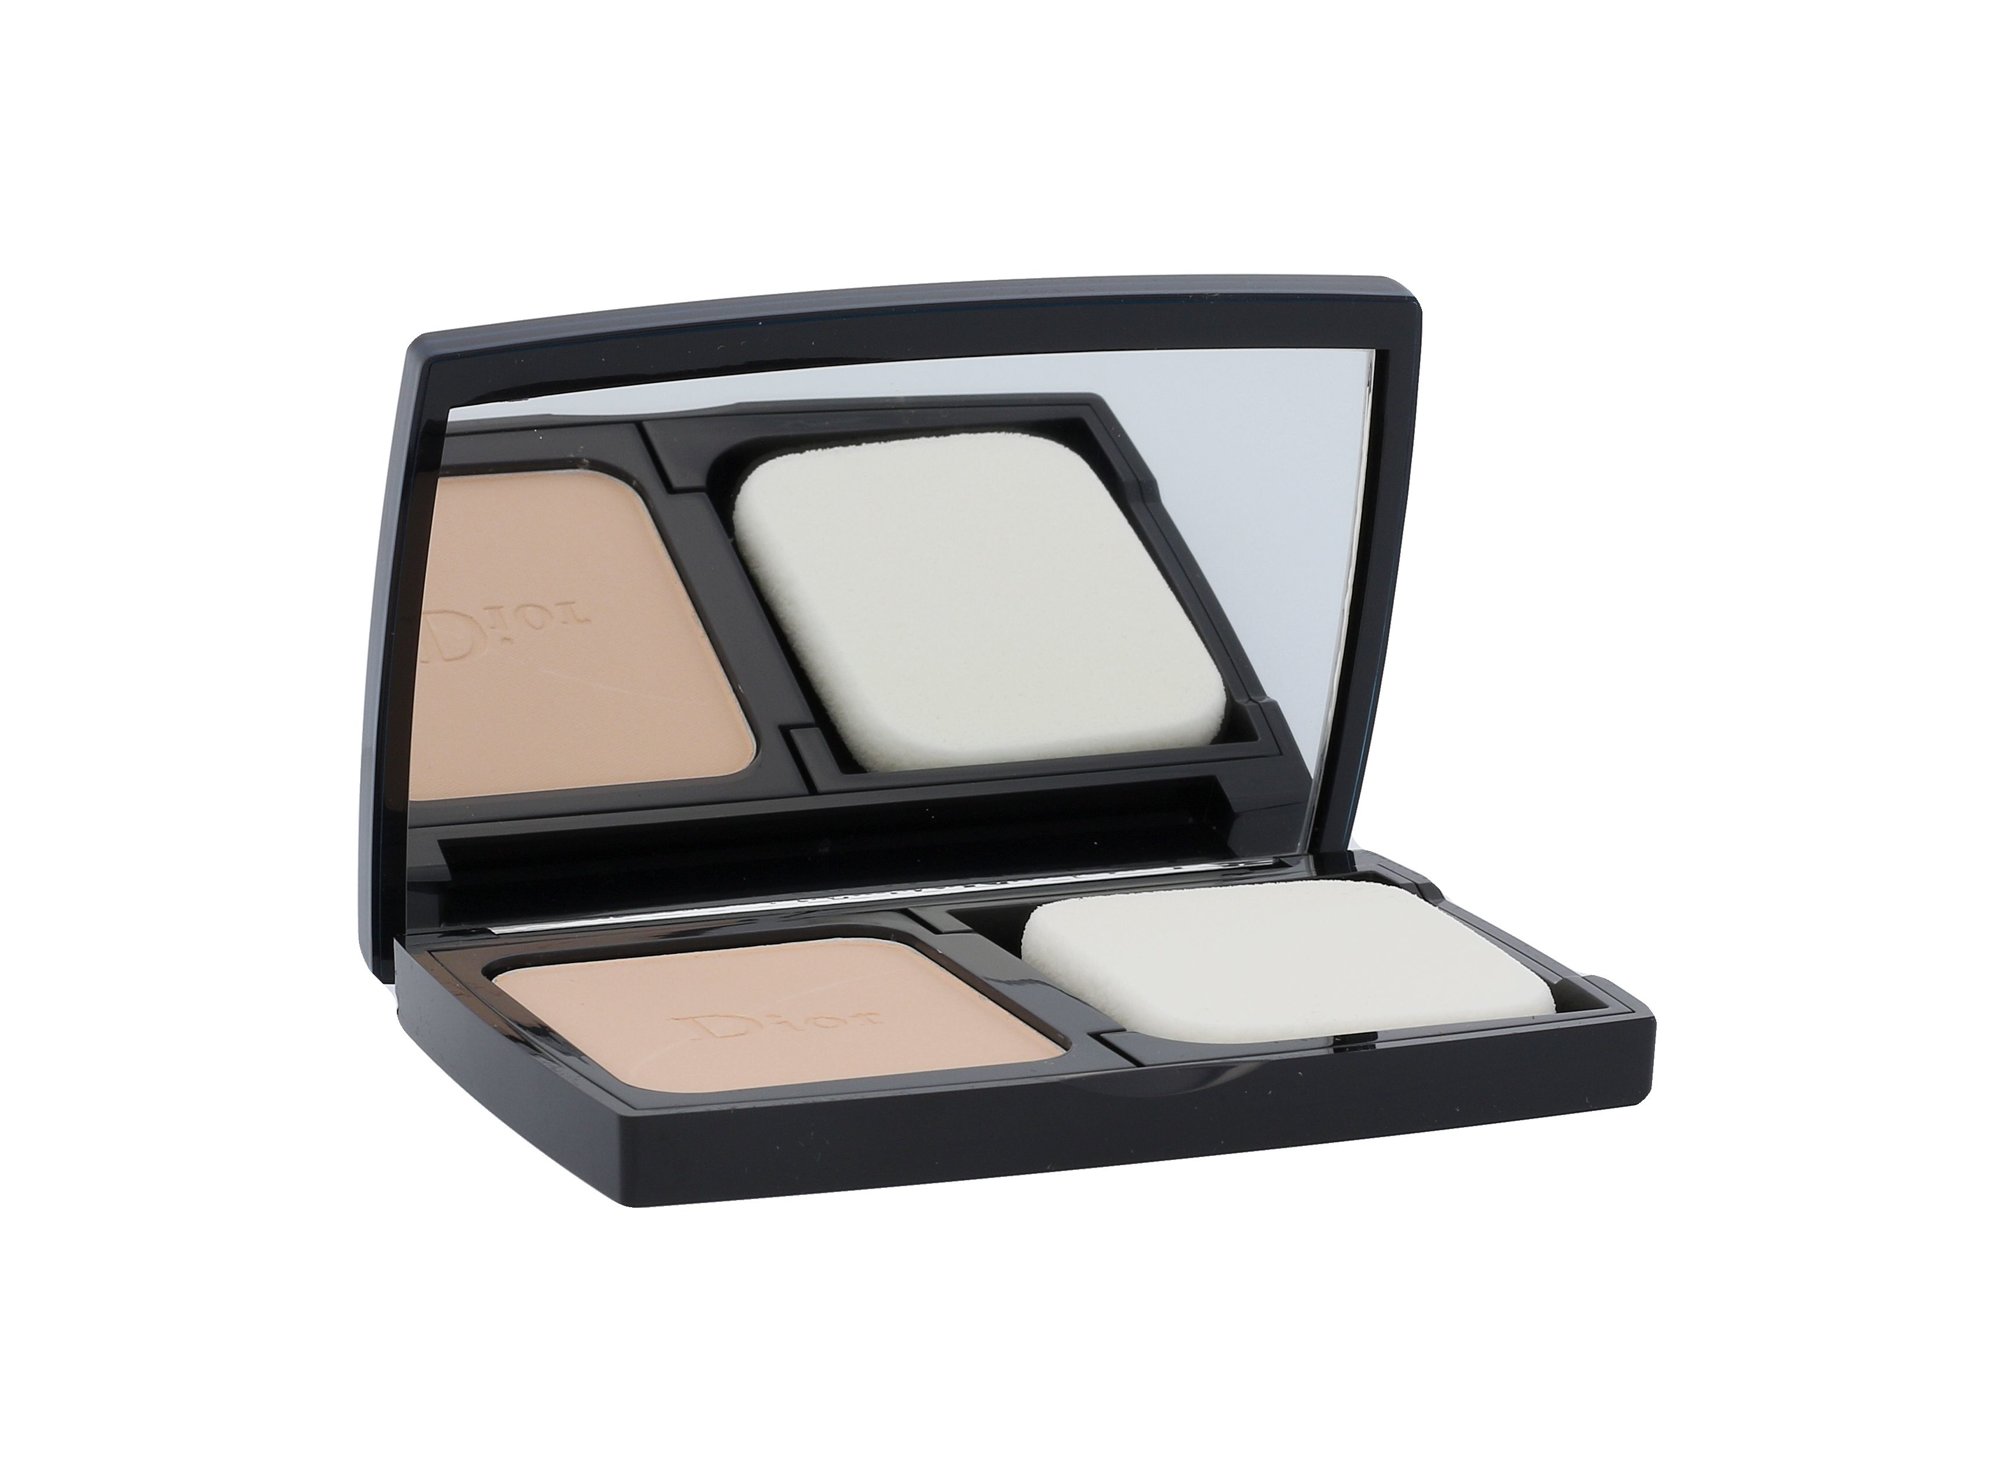 Christian Dior Diorskin Forever Compact Flawless Perfection Fusion Wear SPF25 10g makiažo pagrindas